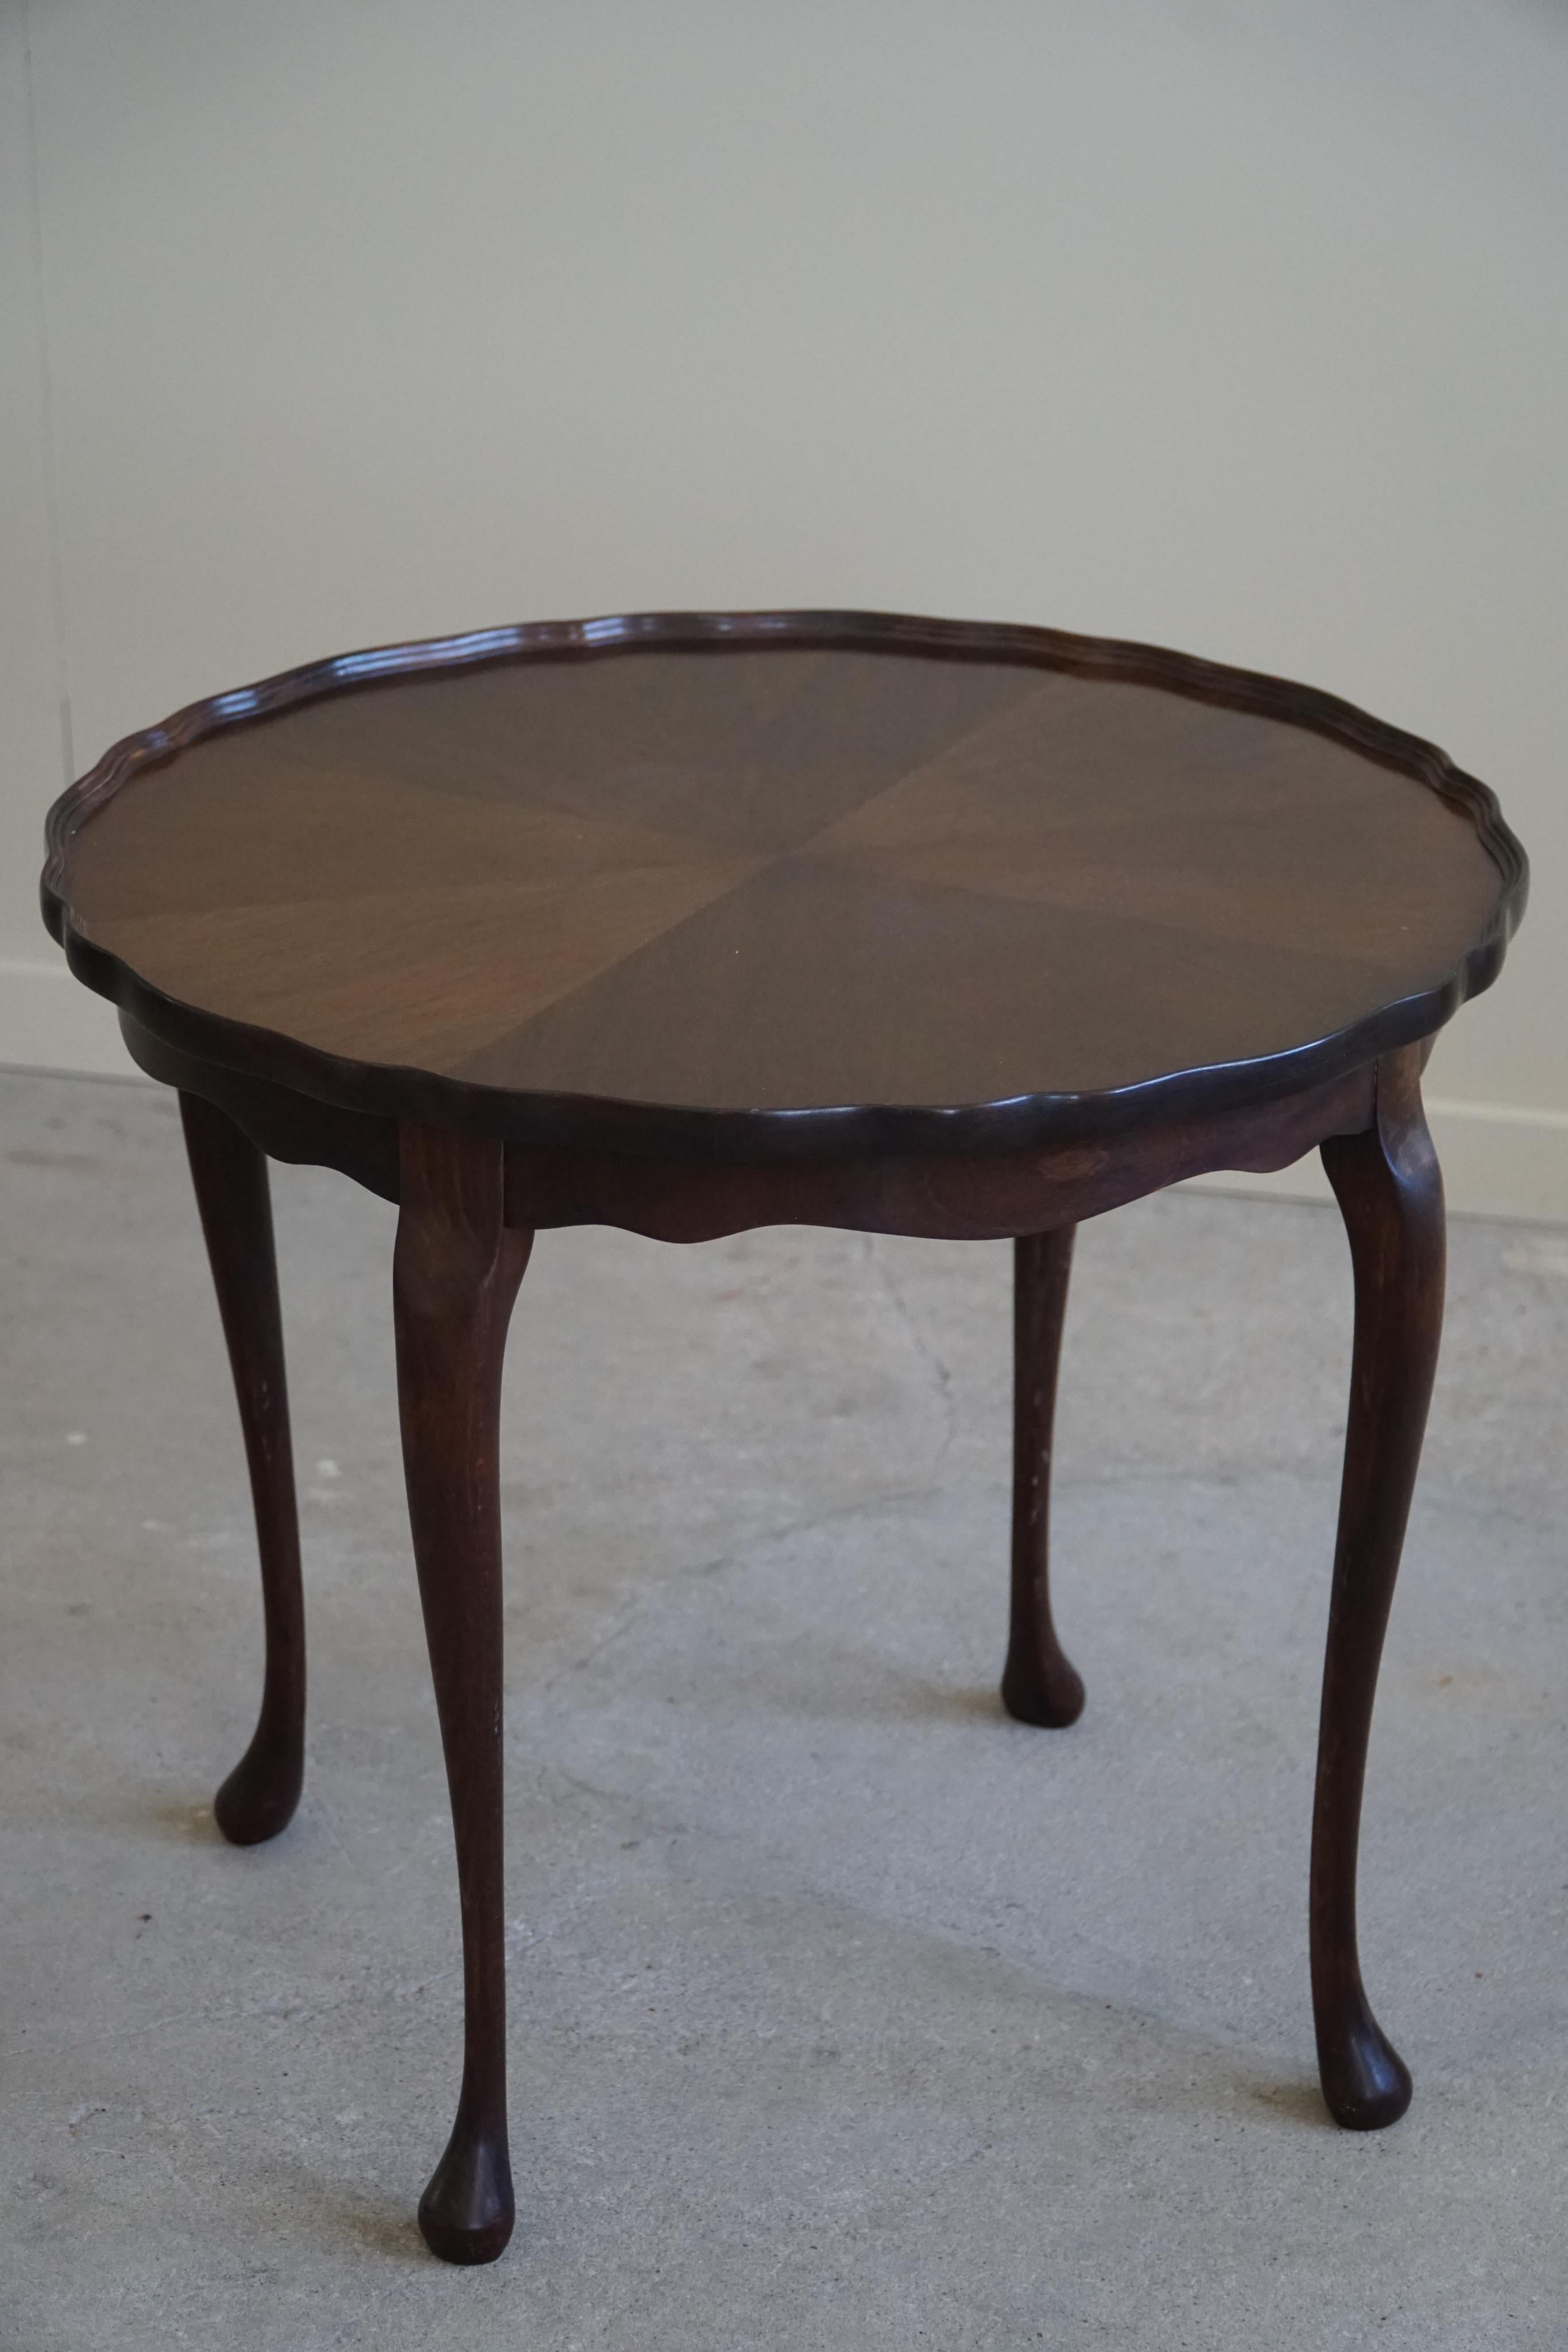 Danish Art Deco Side Table / Coffee Table in Stained Beech, 1940s For Sale 4